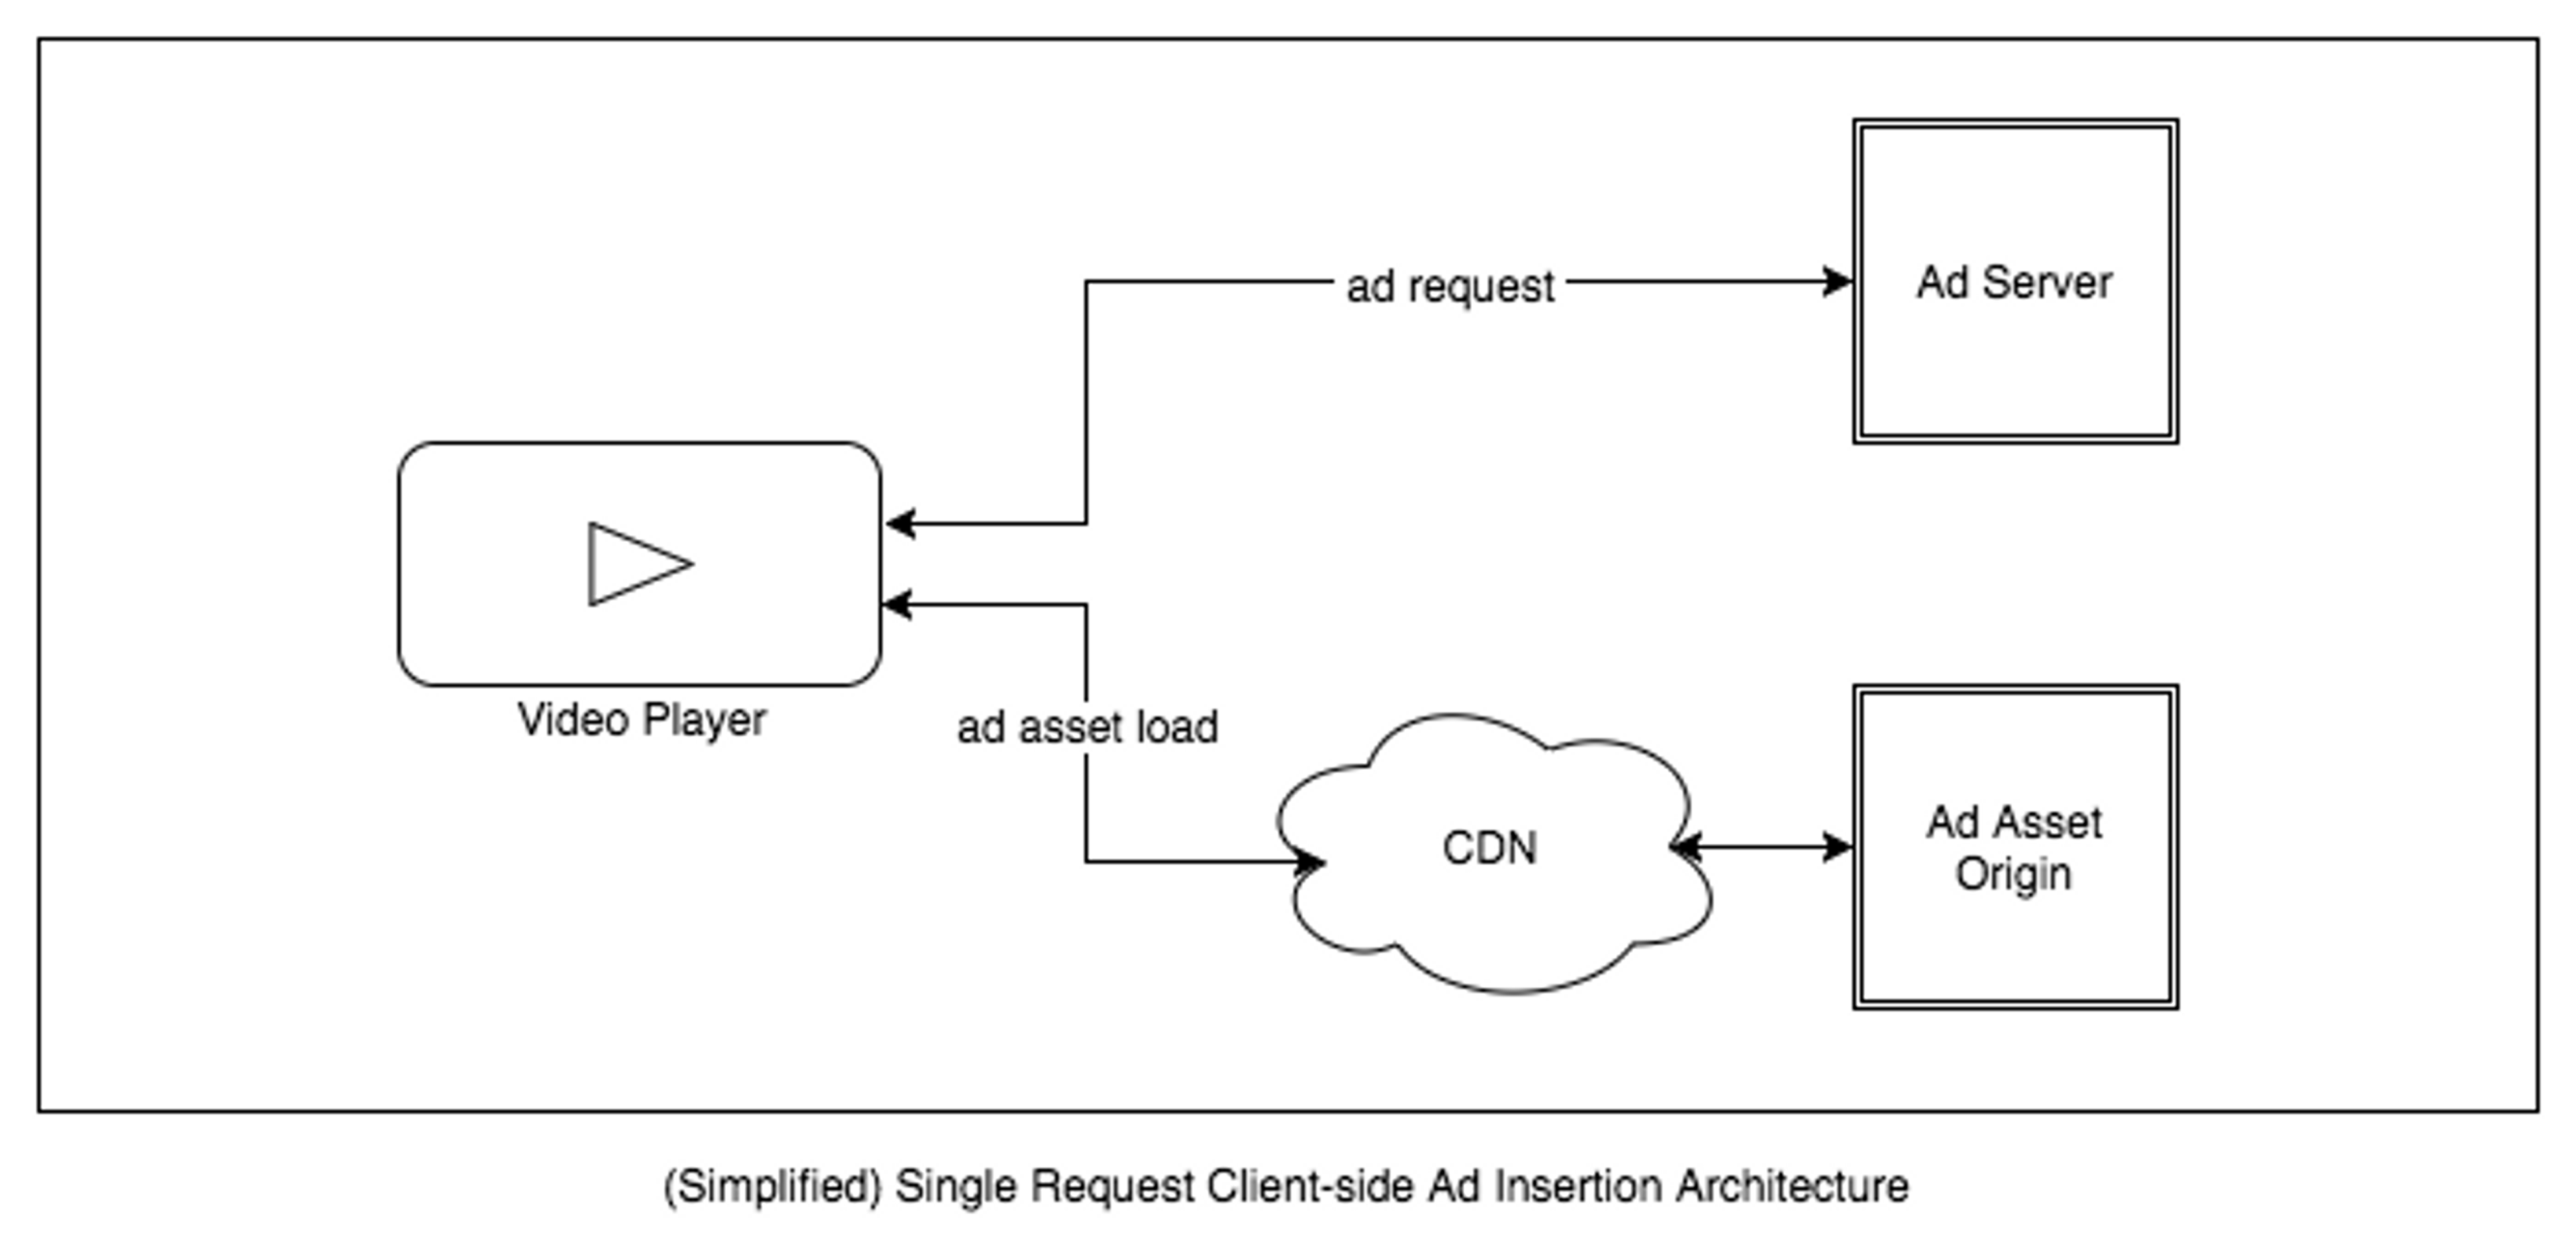 Simplified Single Request Client-side Ad Insertion Architecture